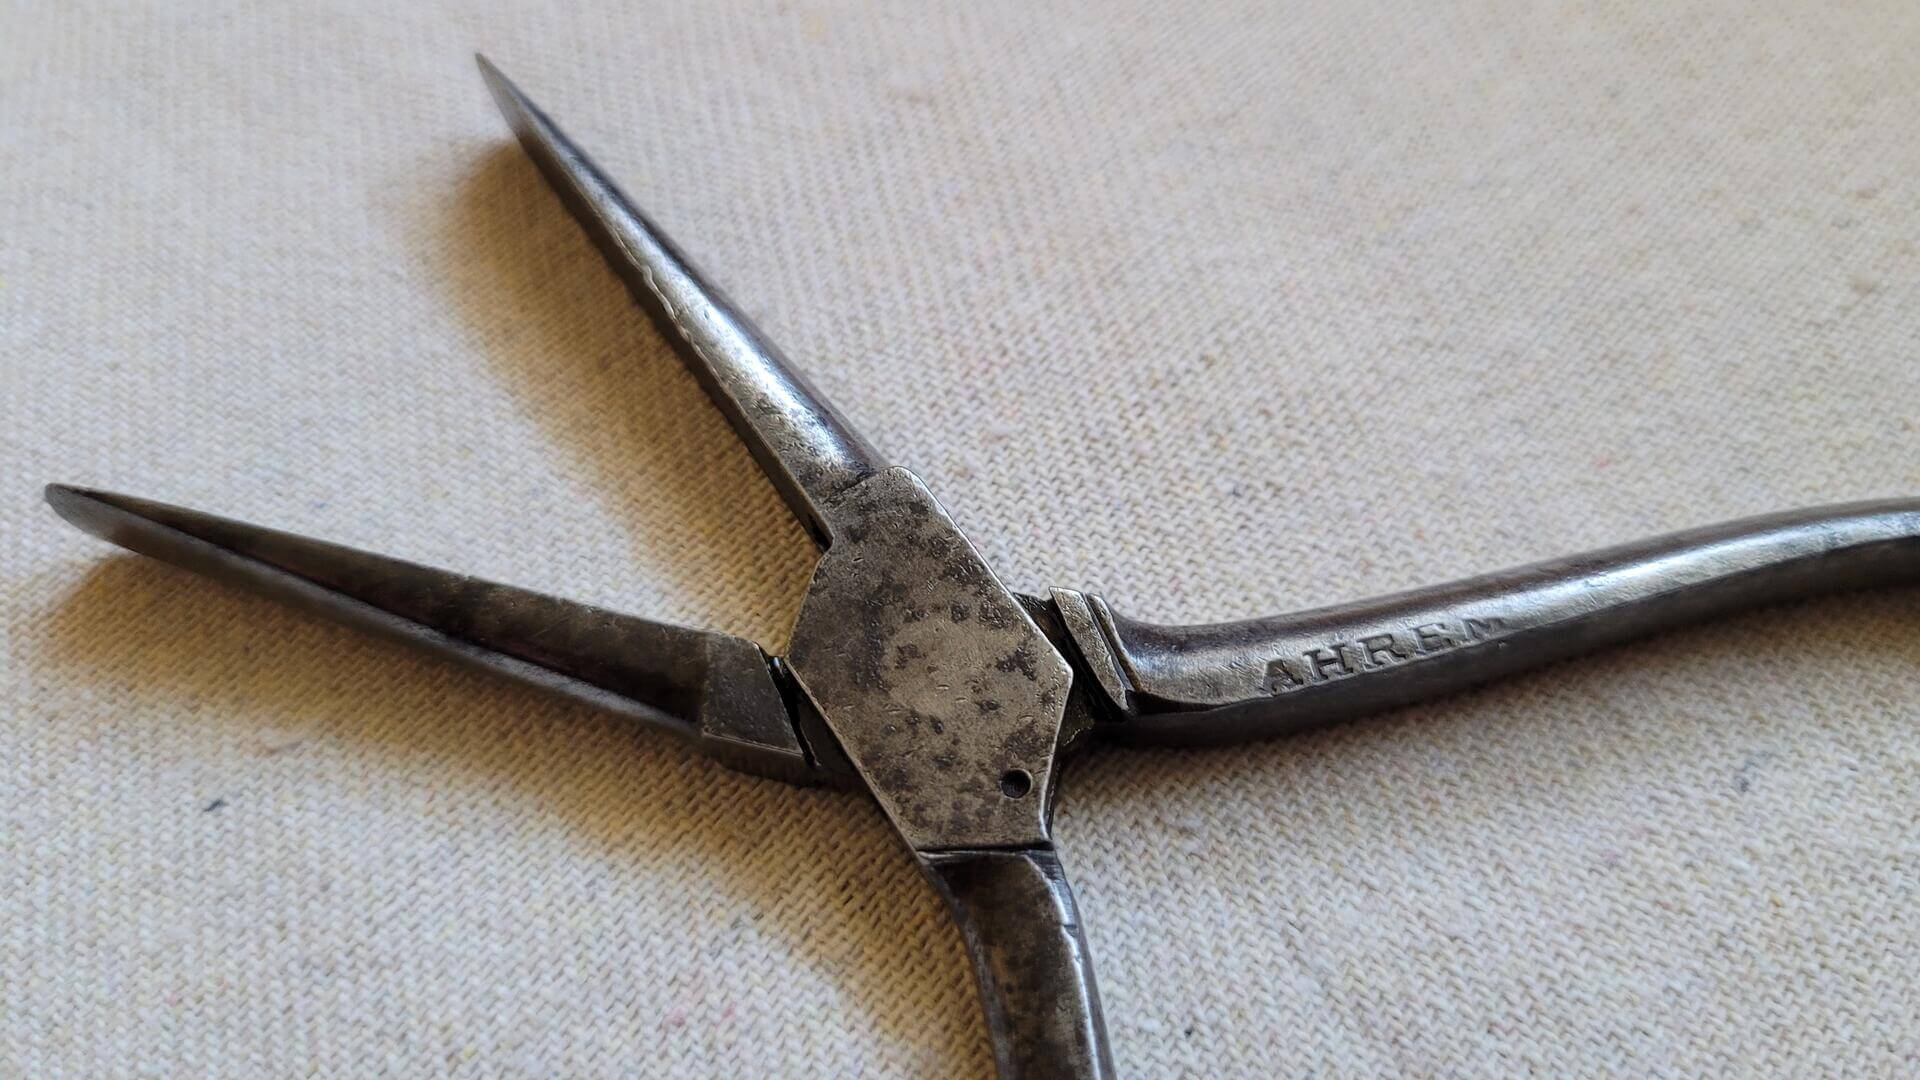 Fine Antique 1950s Ahrem Glazier's Pliers - Made in Germany vintage glazier and jewelry collectible hand tools